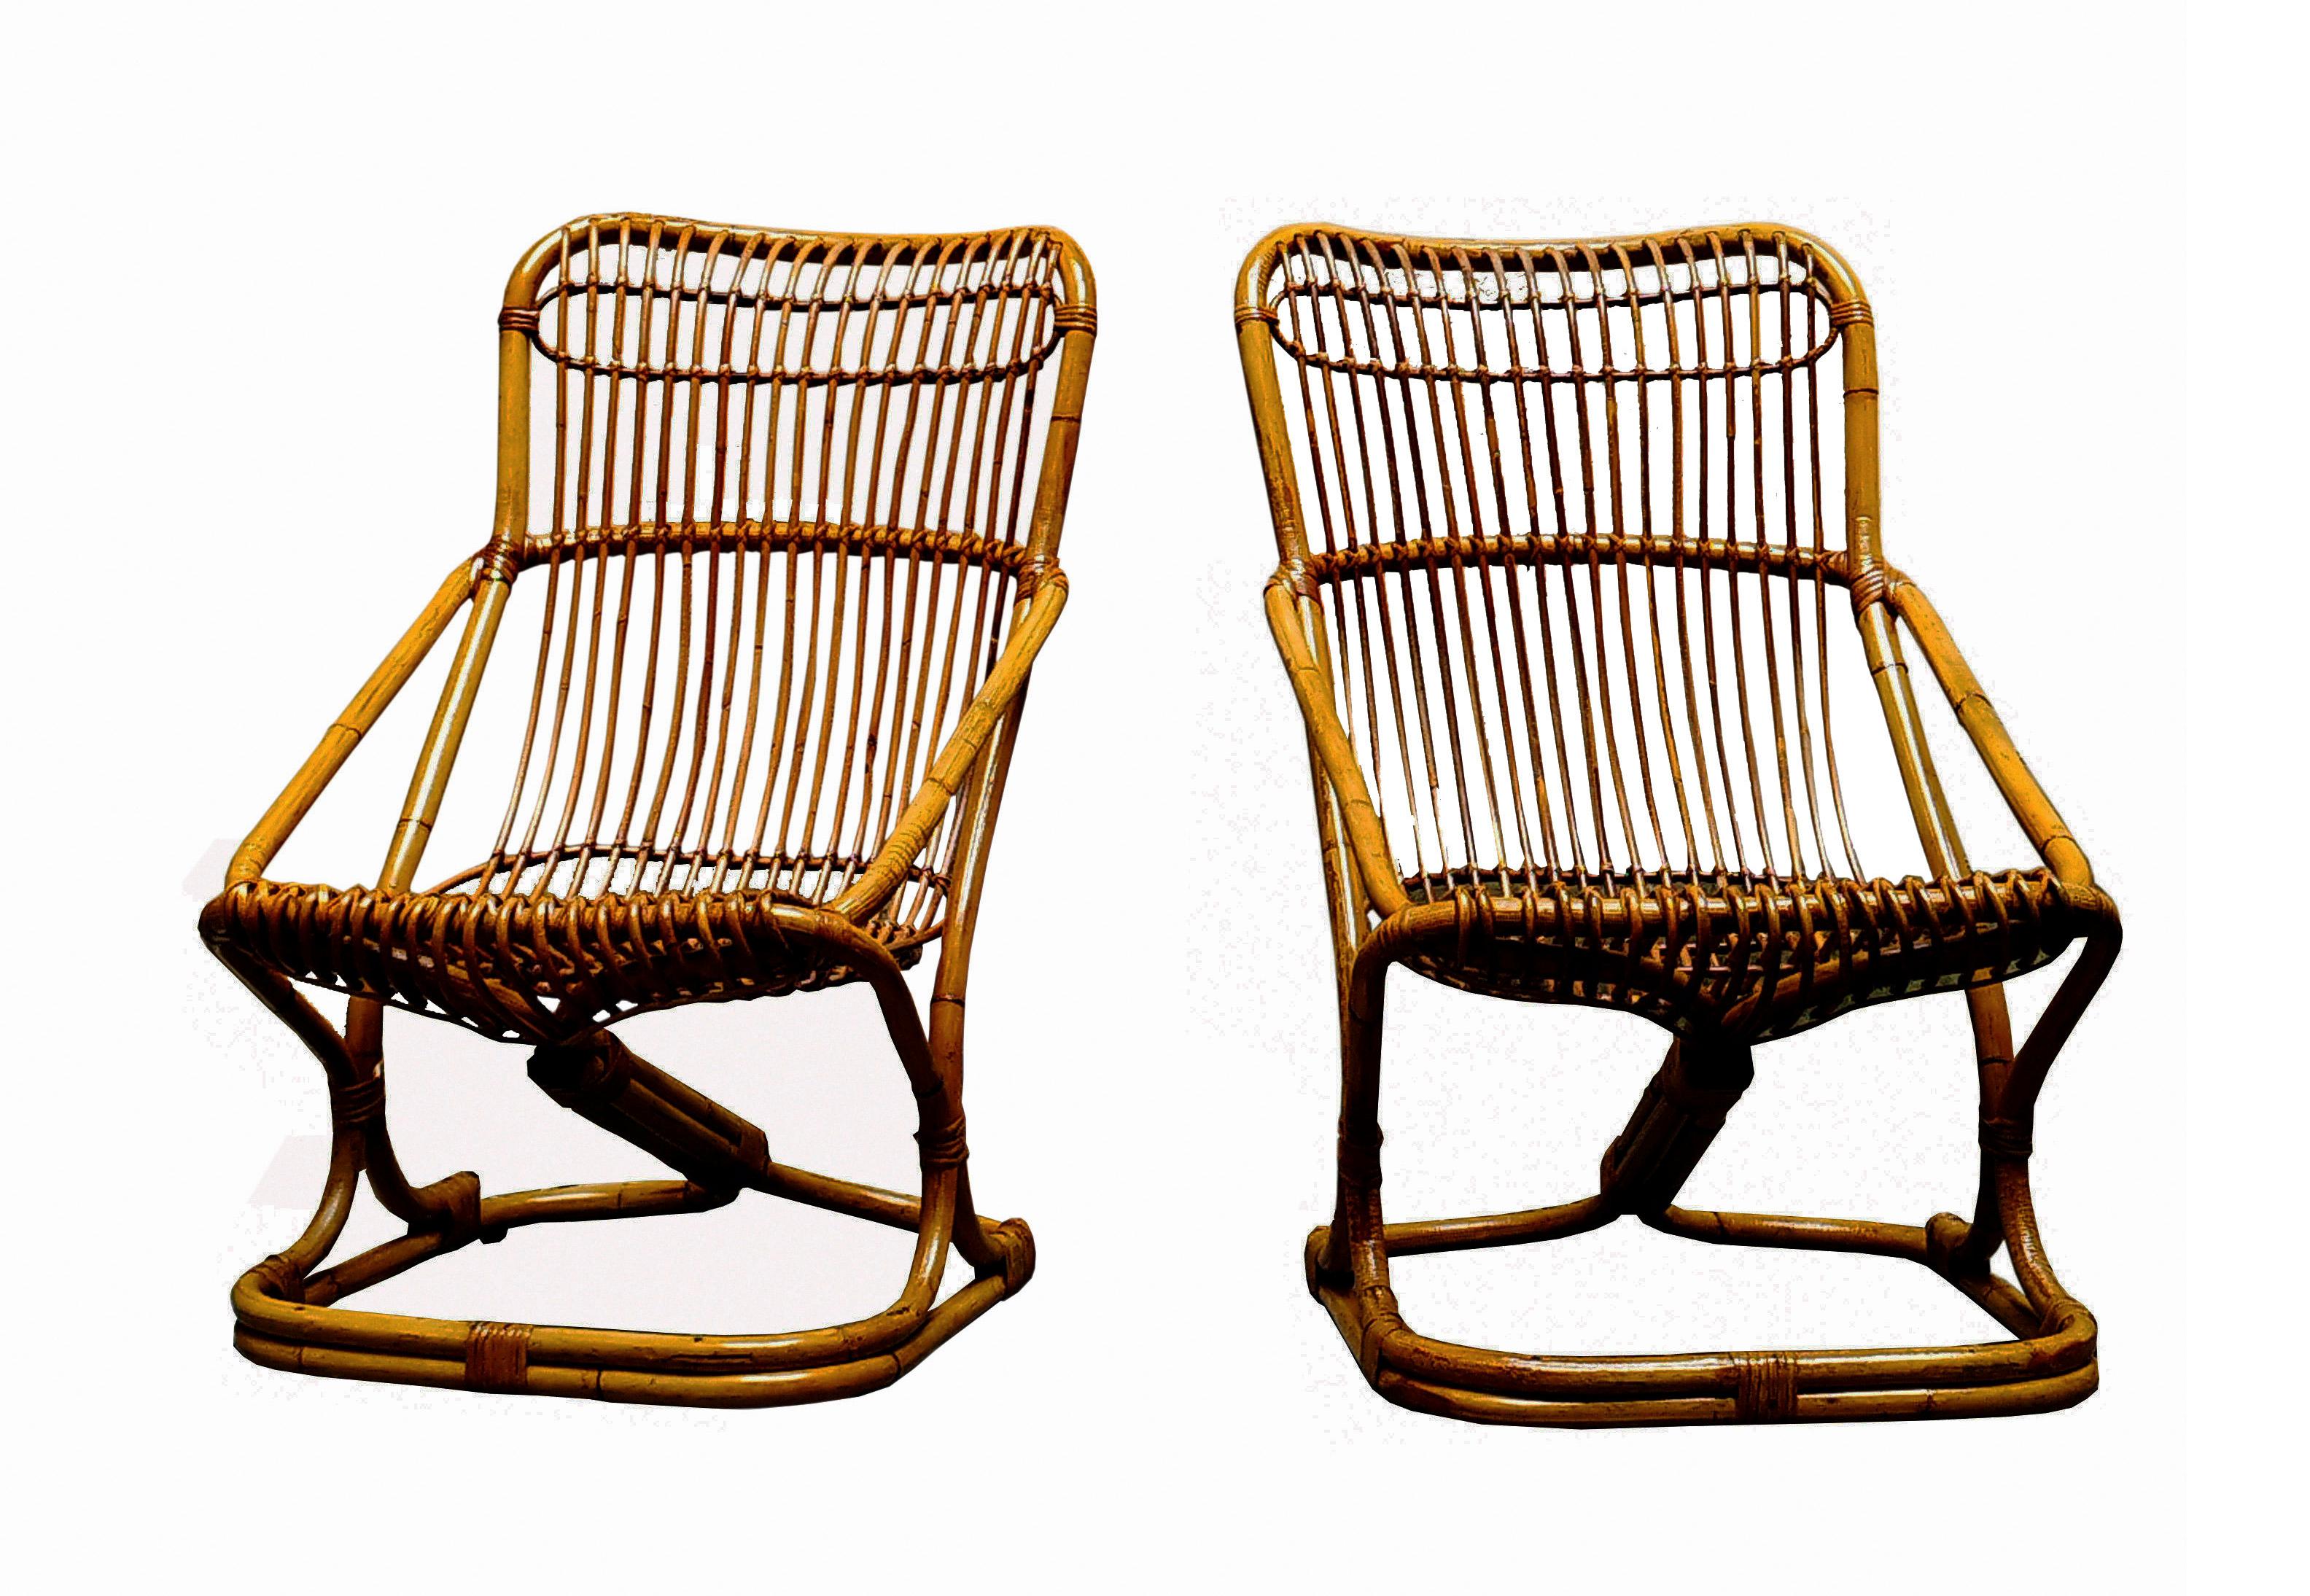 Elegant pair of 1960s malacca armchairs designed by Tito Agnoli. Tito Agnoli was born in Lima to an Italian family; first an architect then a designer, he collaborated with numerous Italian companies, including Bonacina1889. Some of his pieces are